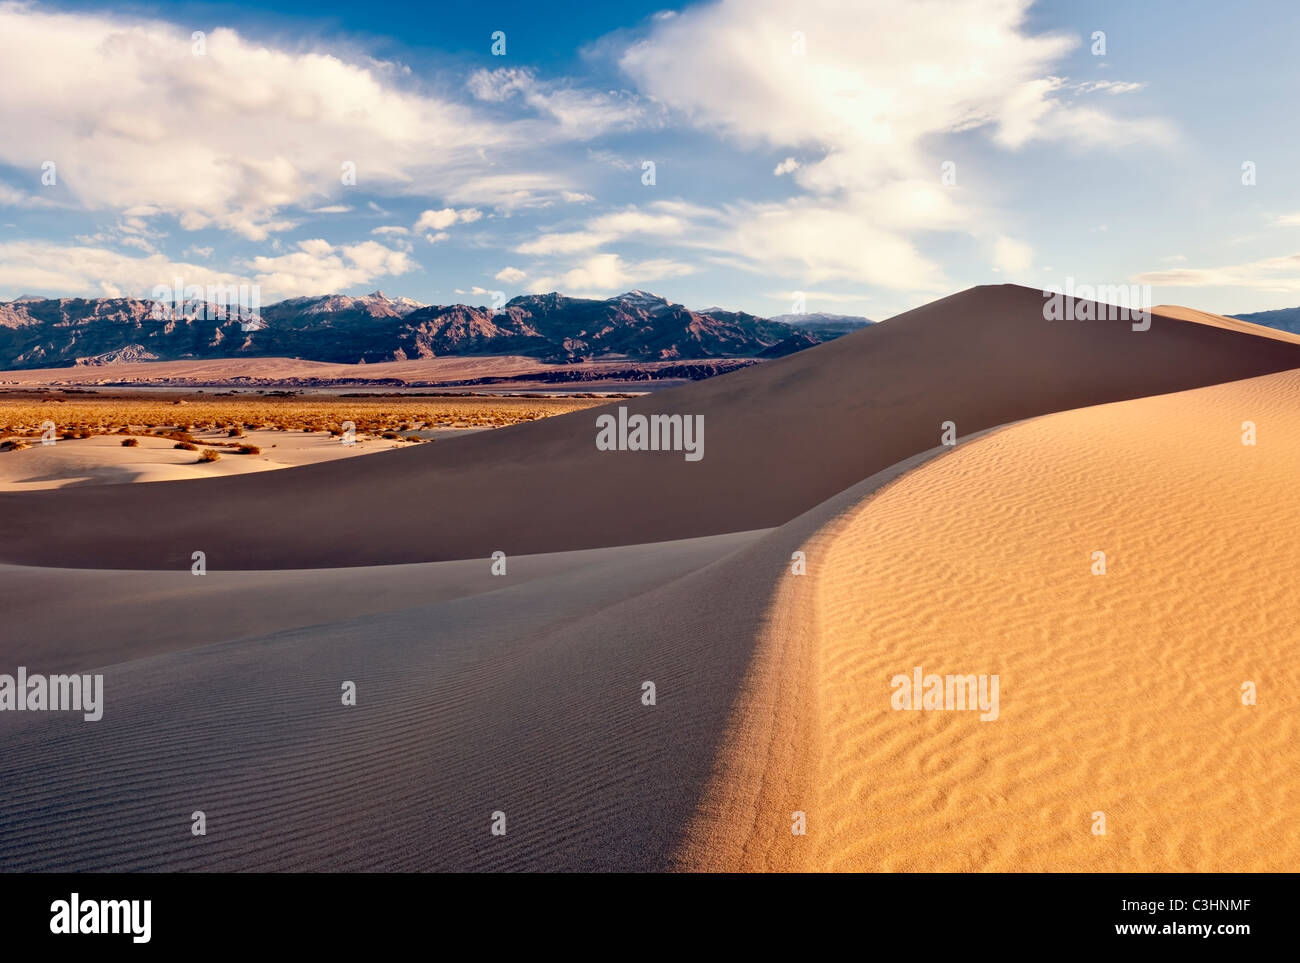 Morning light bathes the Mesquite Dunes in California's Death Valley National Park. Stock Photo